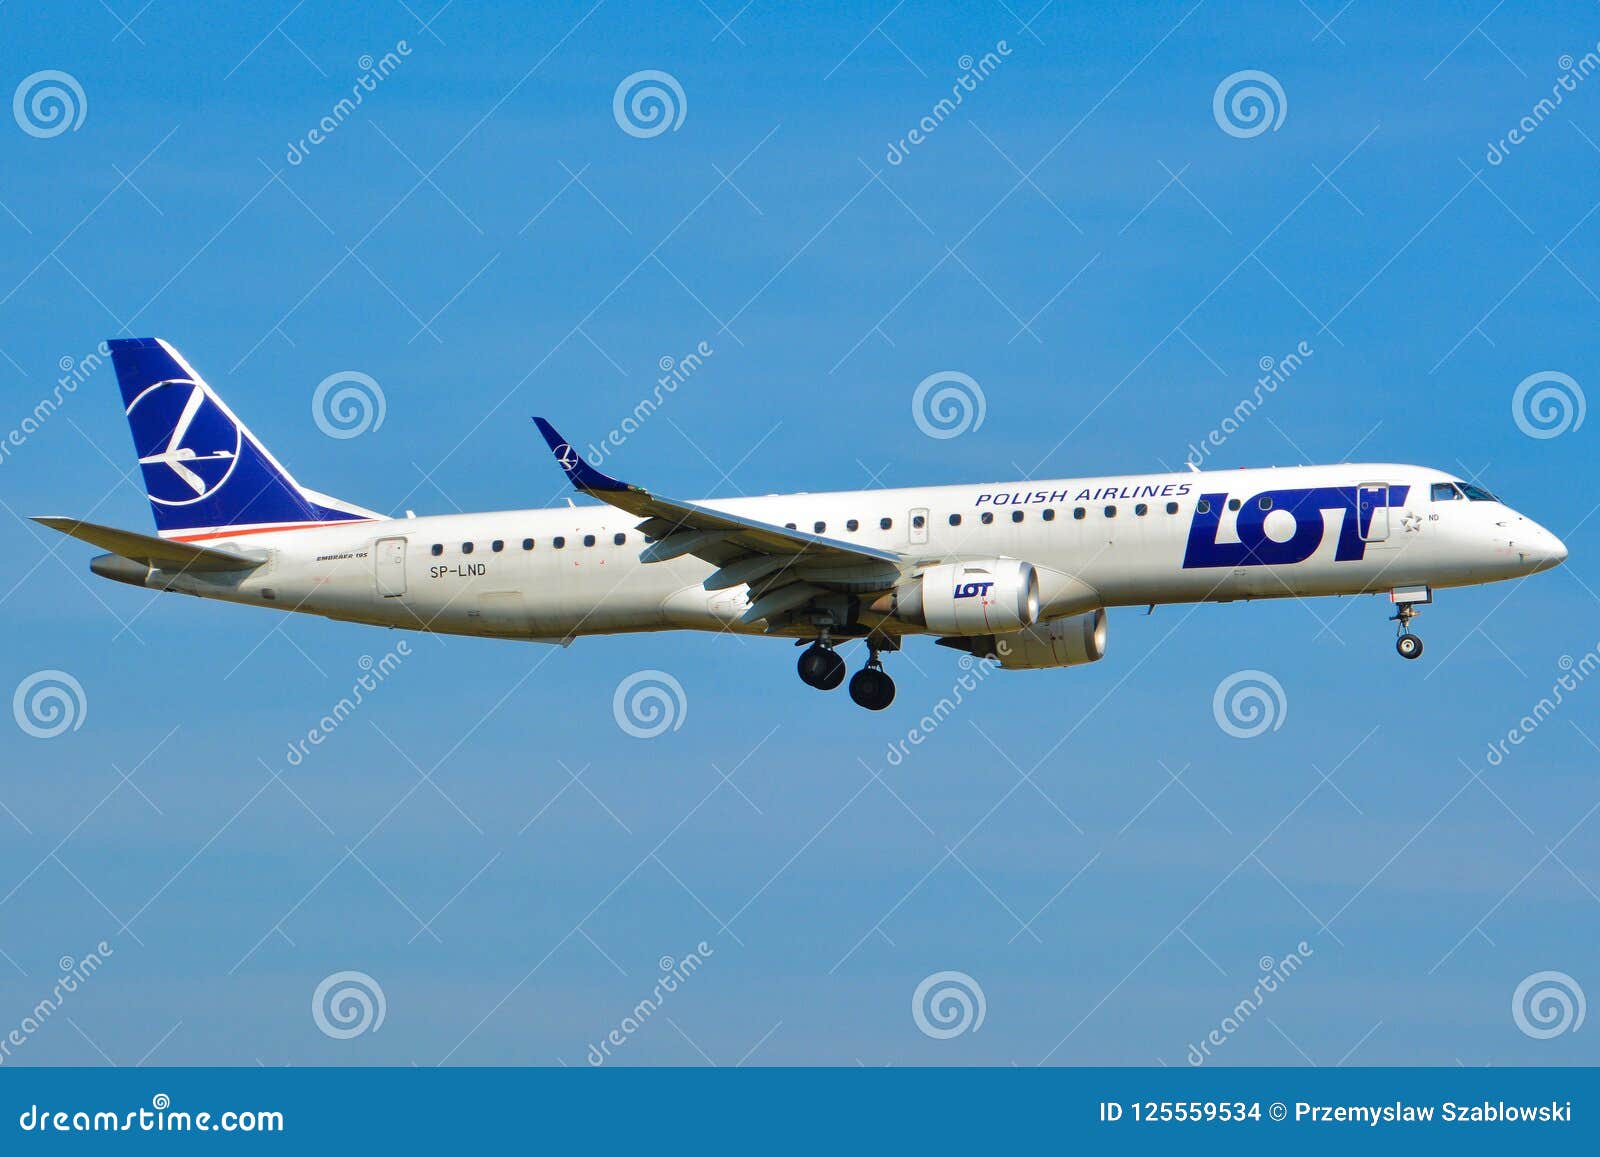 Embraer Erj 195 View Editorial Stock Image Image Of Poland